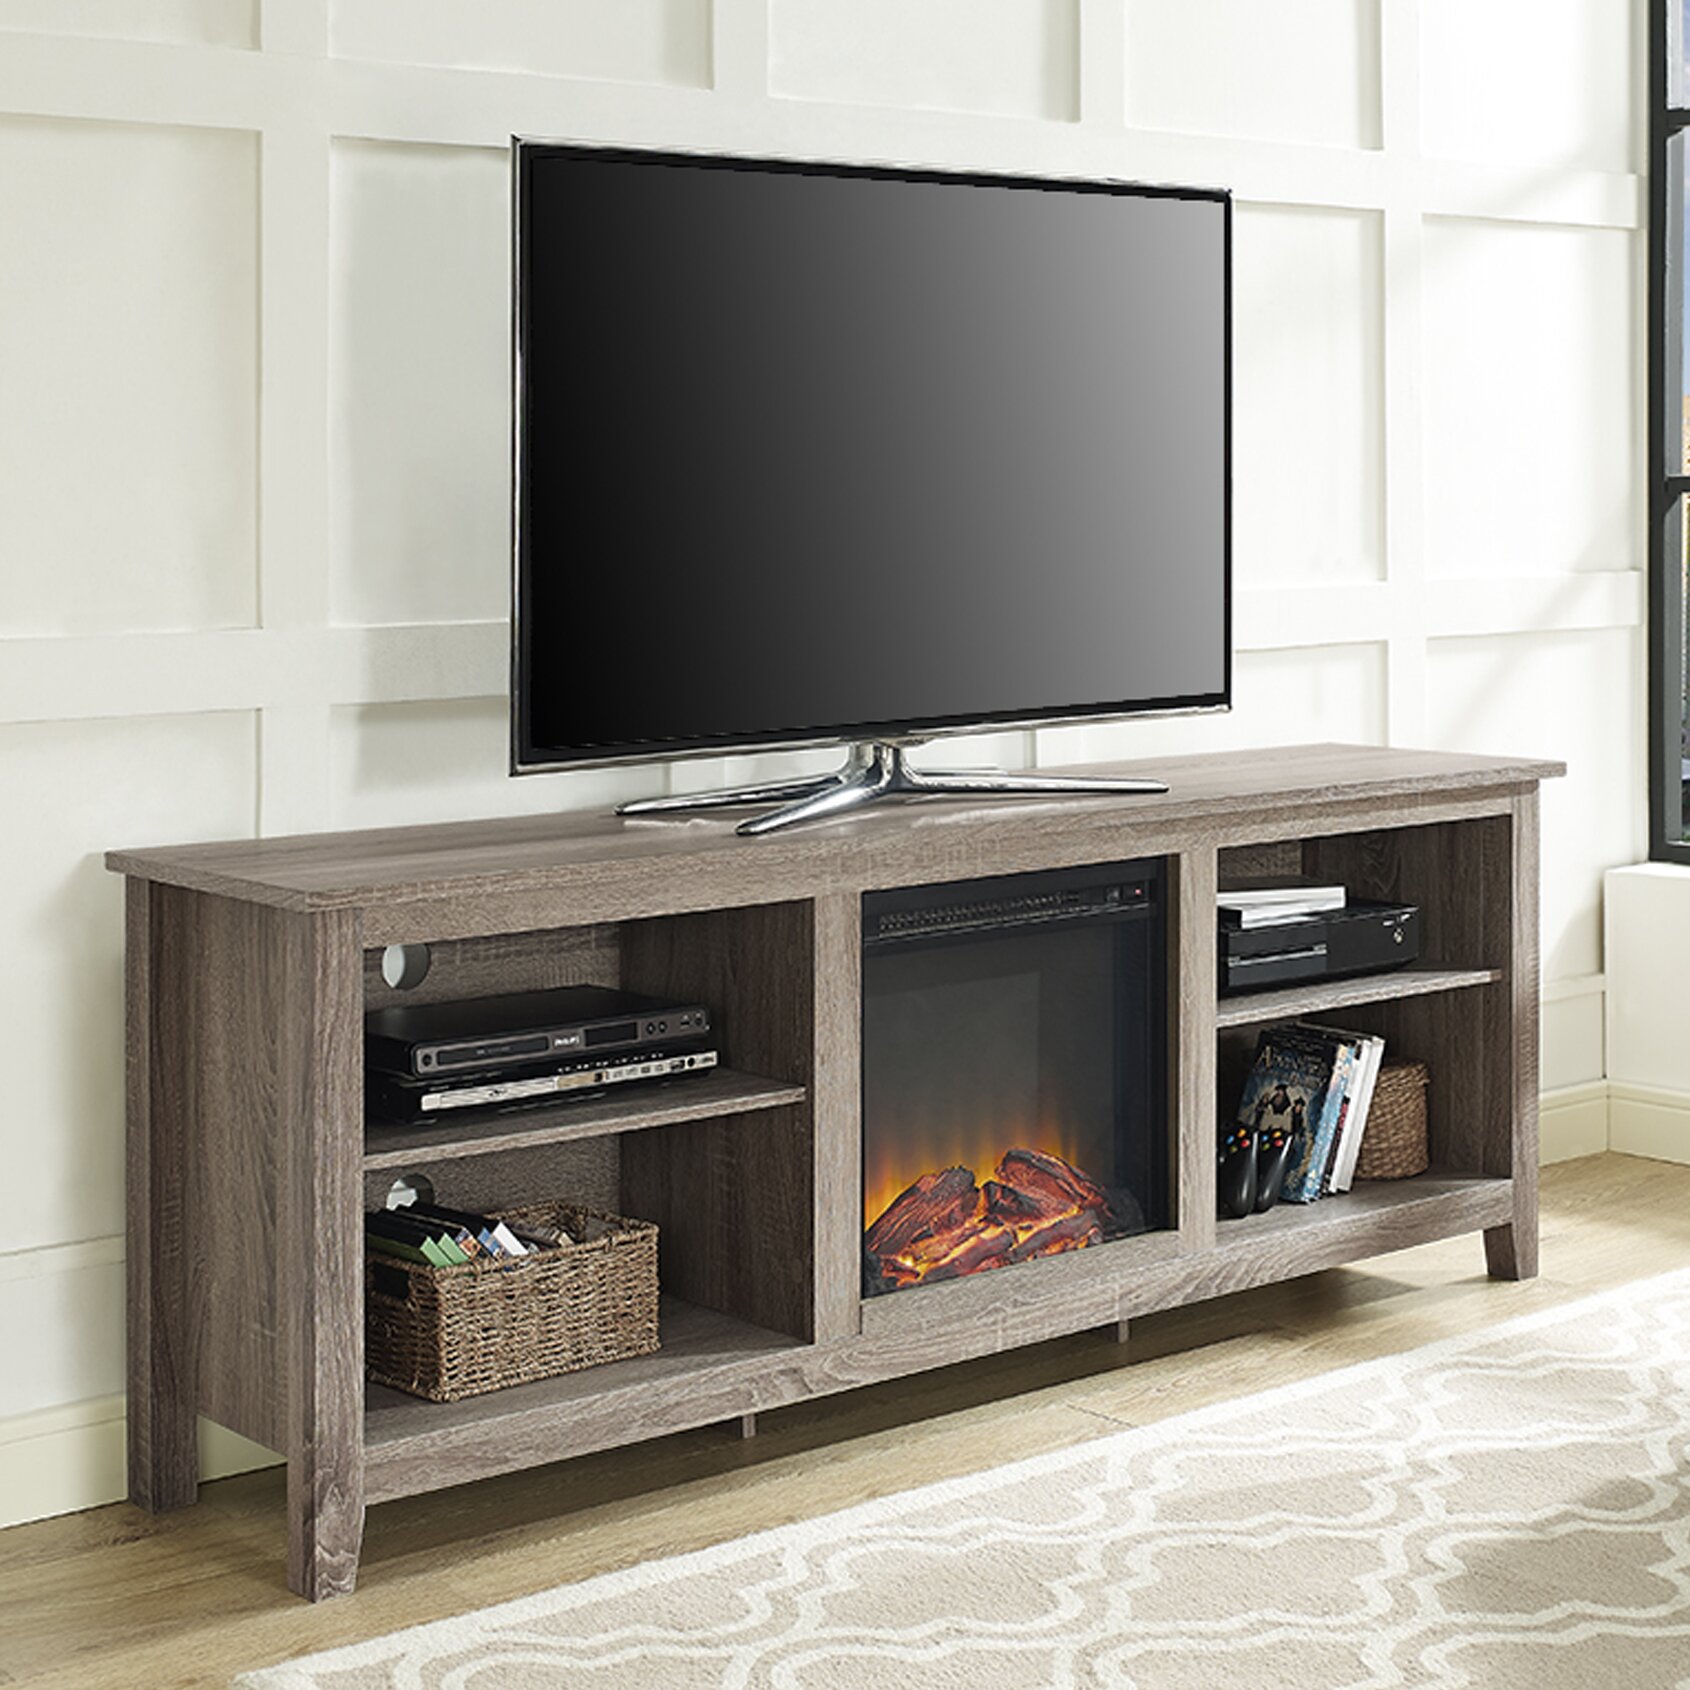 Beachcrest Home Sunbury TV Stand with Electric Fireplace ...